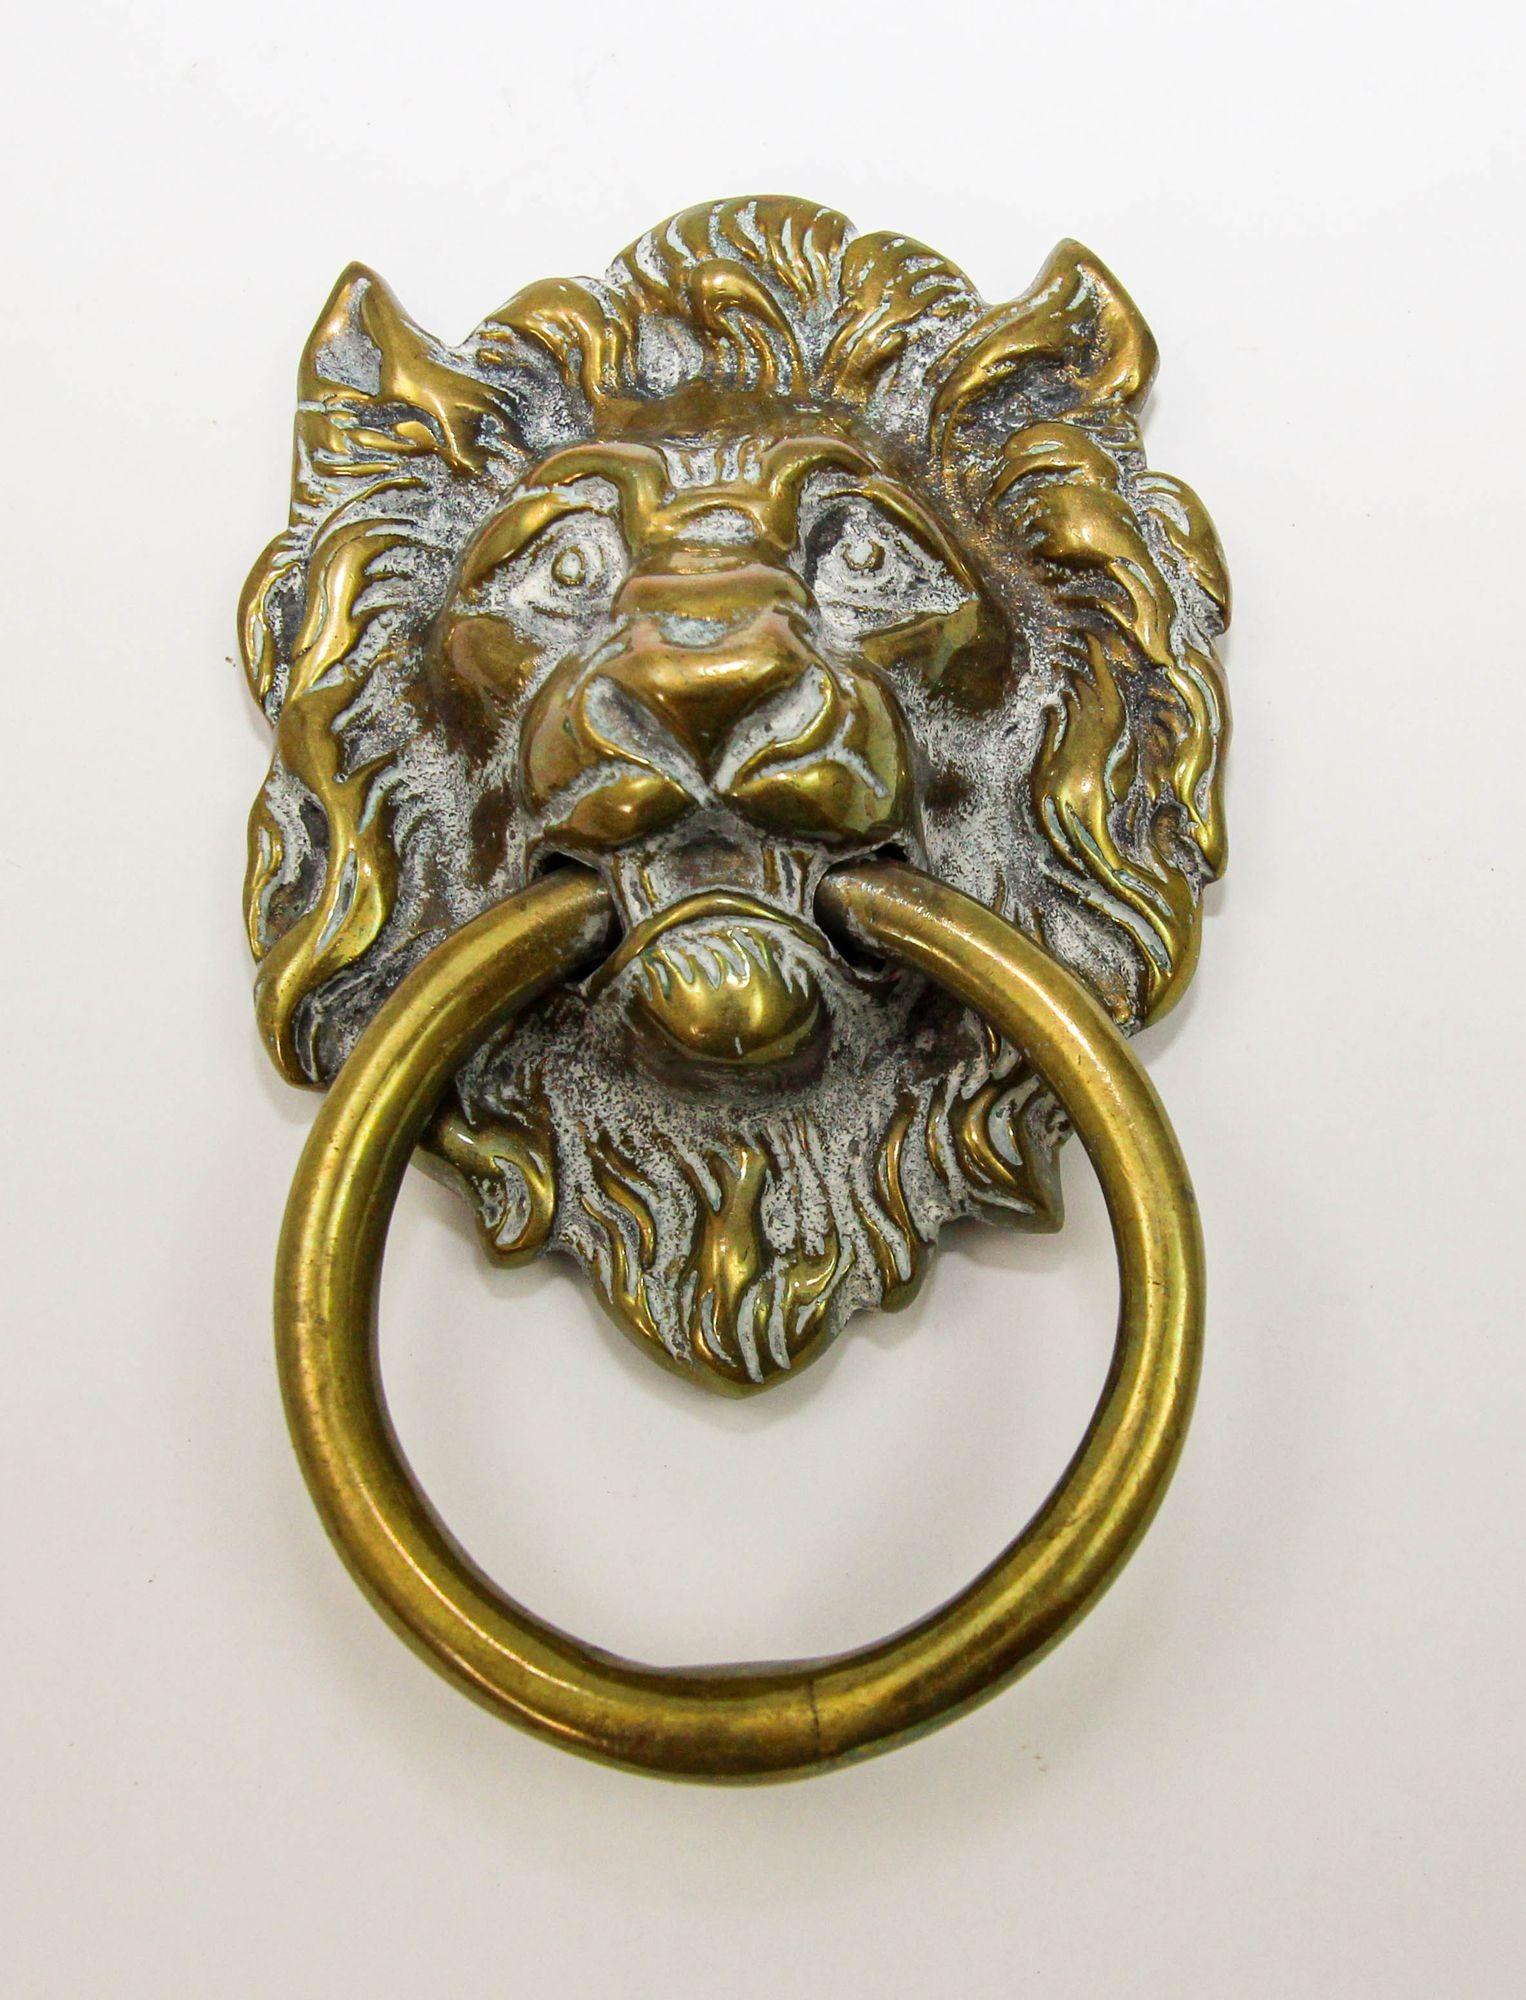 Vintage Patinated Solid Cast Brass Lion's Head Door Knocker.
Vintage large solid cast brass Lion's Head door knocker.
Georgian English style large hand cast bronze lion's head door knocker.
The lion's head form with attached knocker hand pull